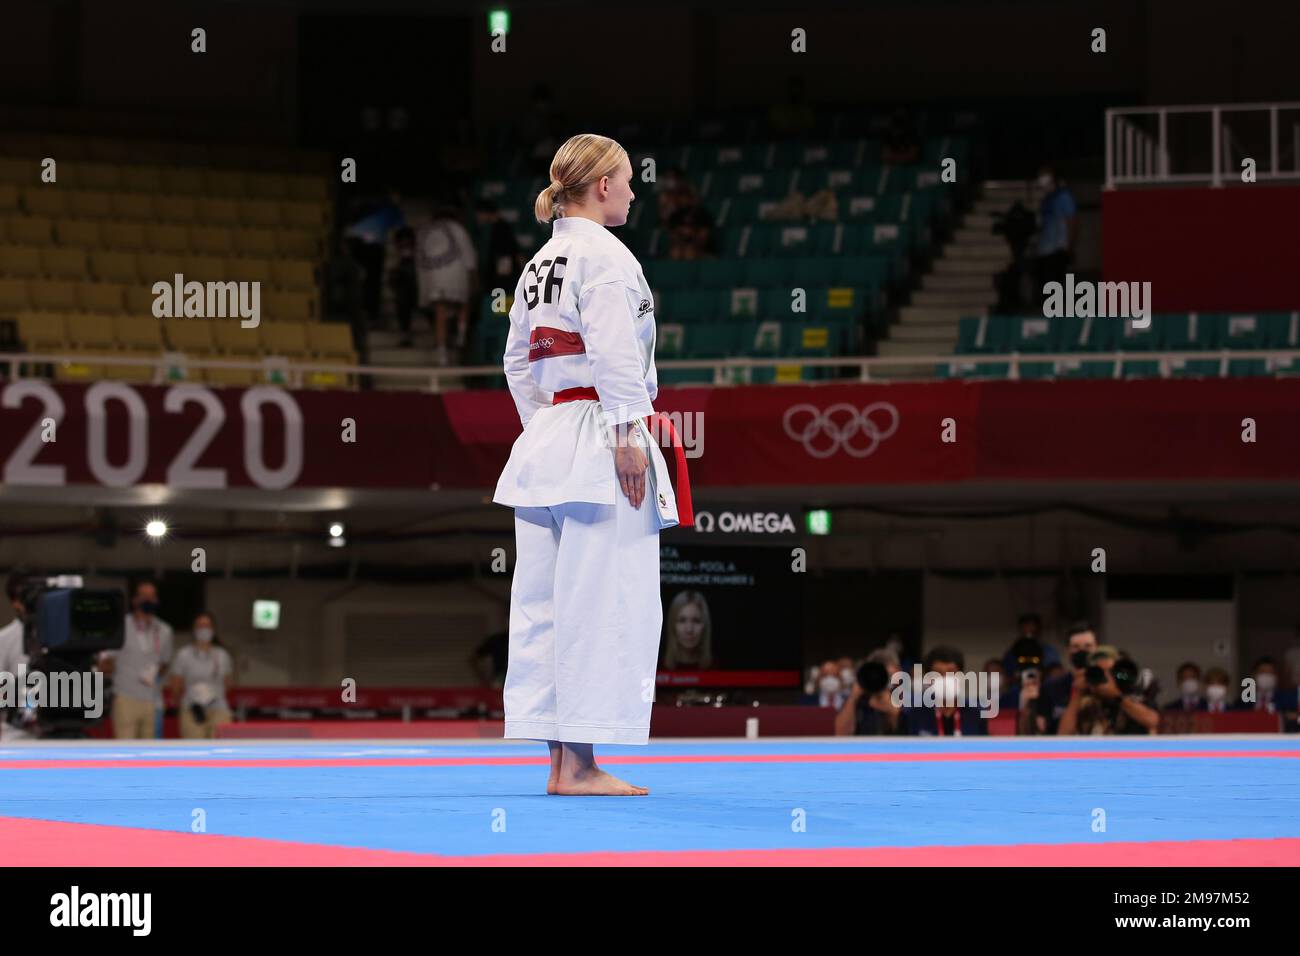 AUG 5, 2021 - TOKYO, JAPAN: Jasmine Jüttner of Germany makes History by becoming the very first Karateka at the Olympics by competing in the Women's Kata Elimination Round at the Tokyo 2020 Olympic Games (Photo by Mickael Chavet/RX) Stock Photo